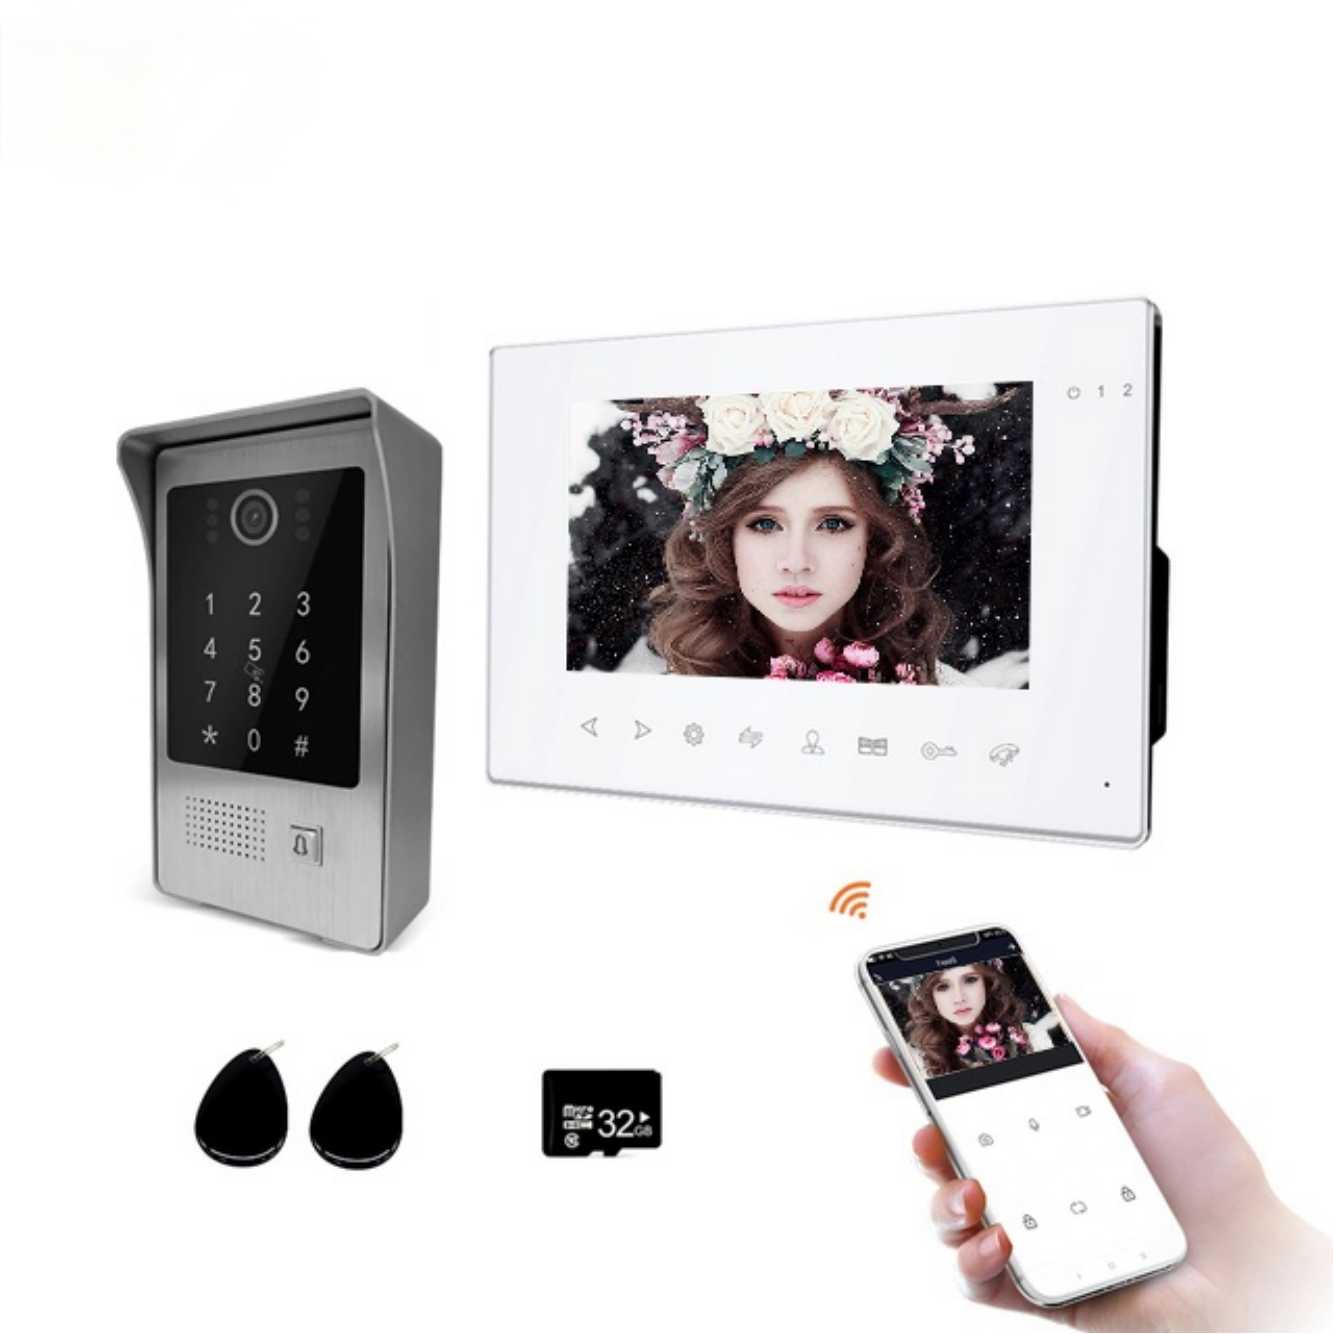 Tuya Smart Wifi 7'' 1080P Video Doorbell Intercom System for Home Security Motion Detection Password RFID Card App Remote Control